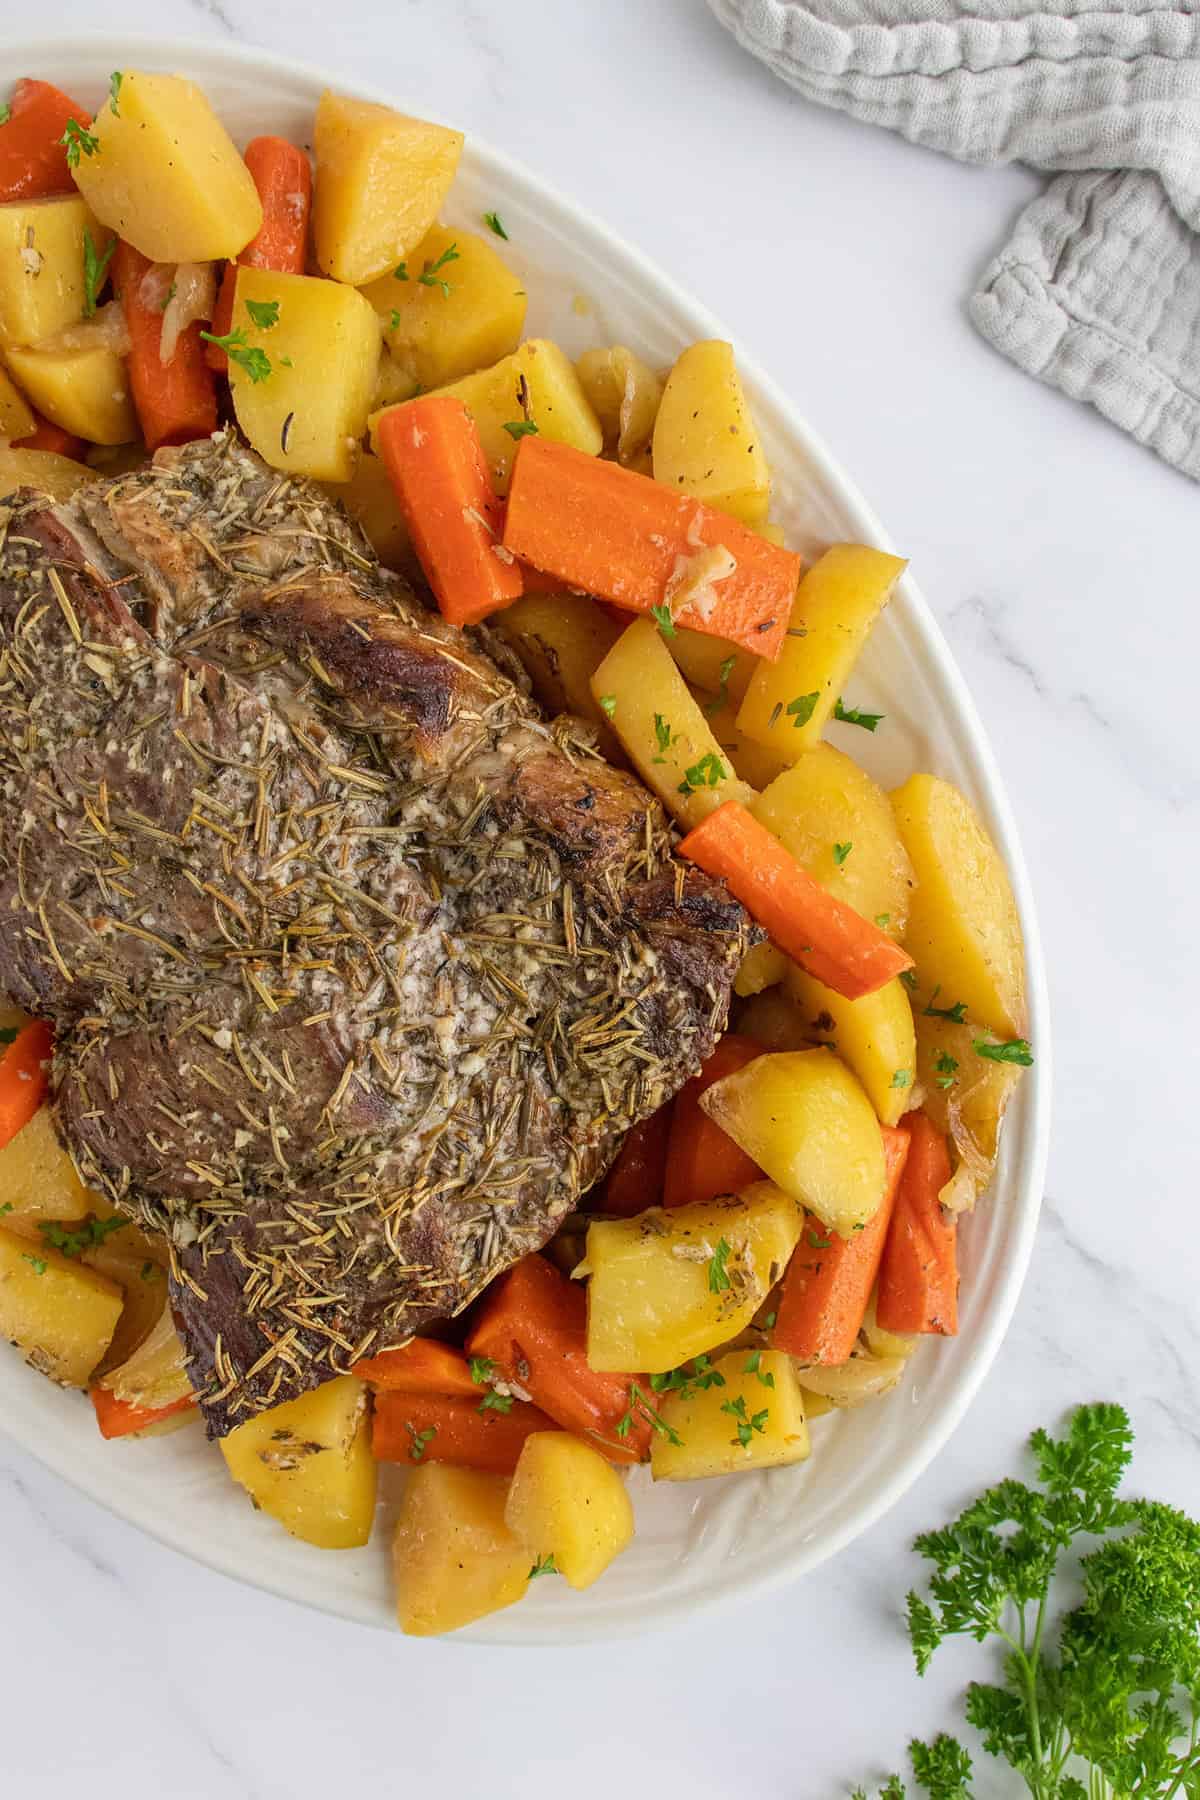 How To Cook a Top Sirloin Roast (and Sirloin Tip) - The Kitchen Magpie